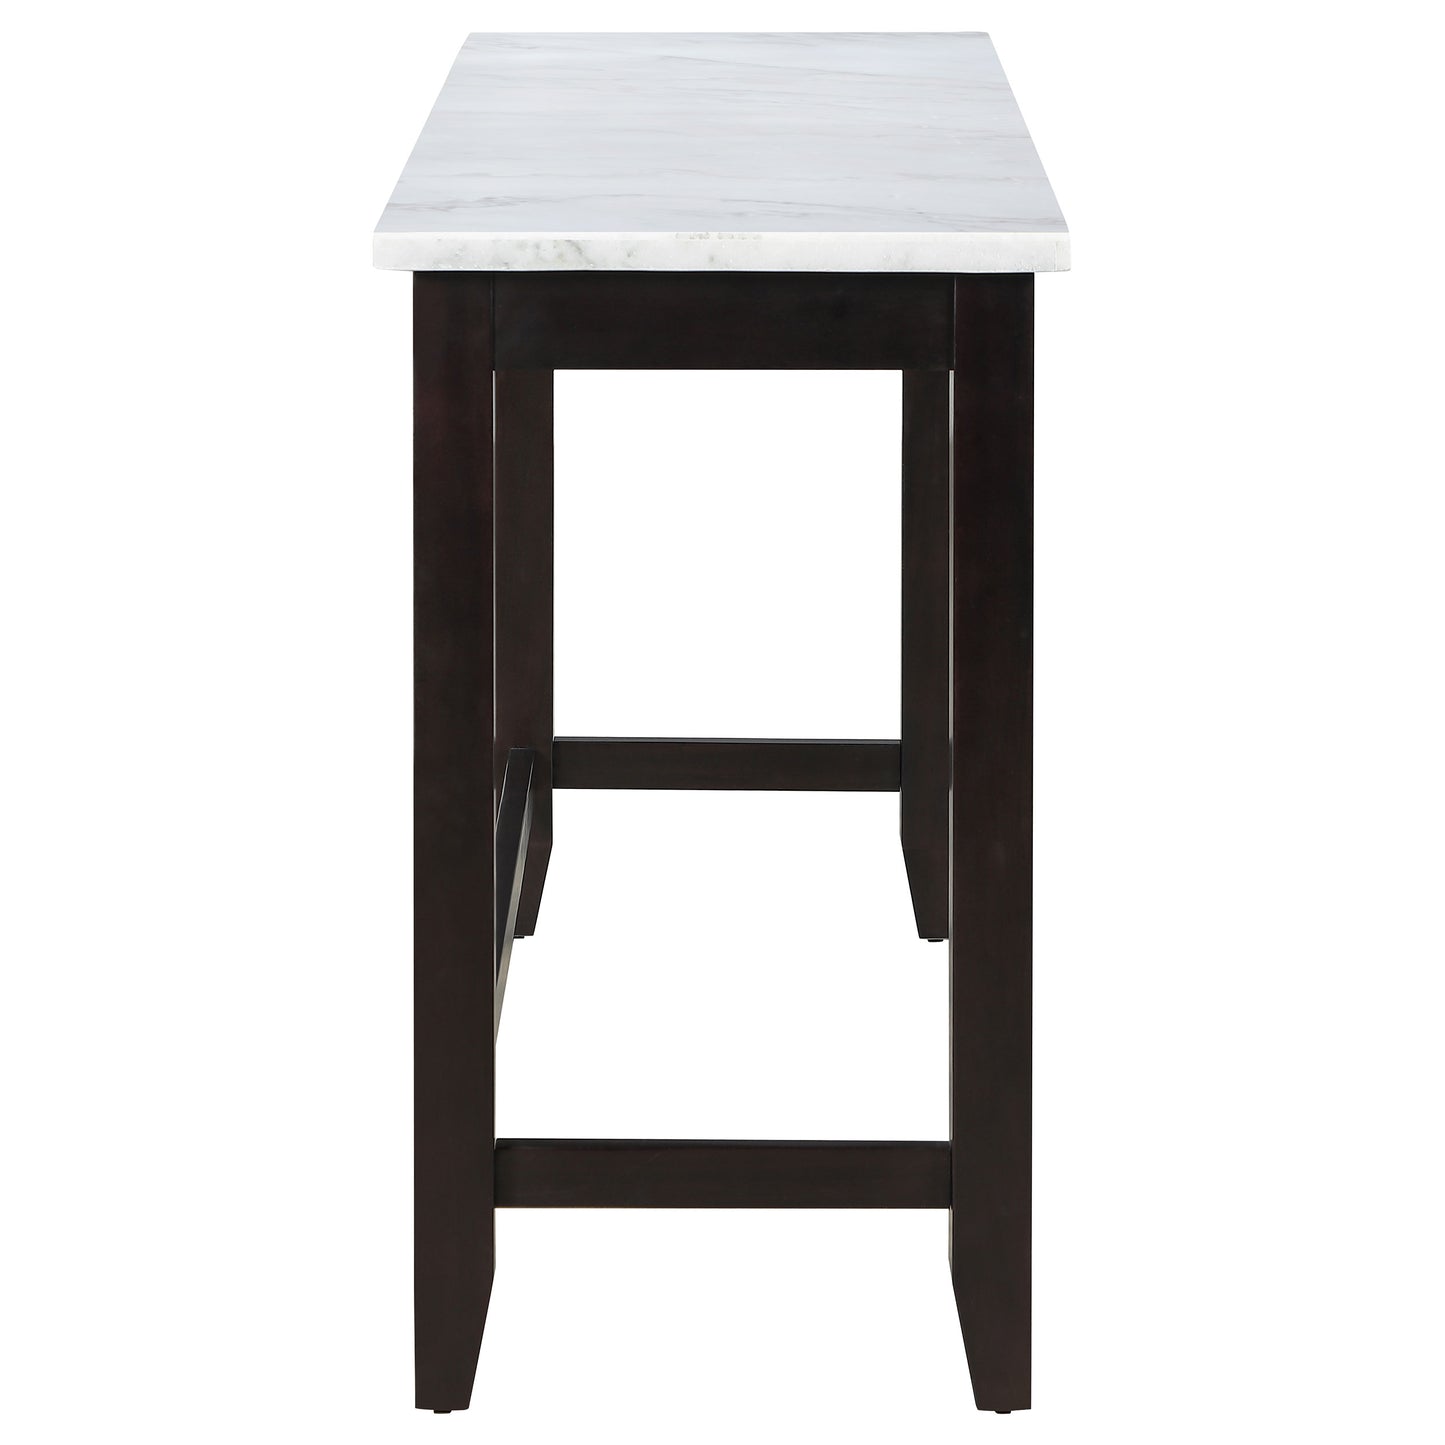 Toby Rectangular Marble Top Counter Height Table Espresso and White